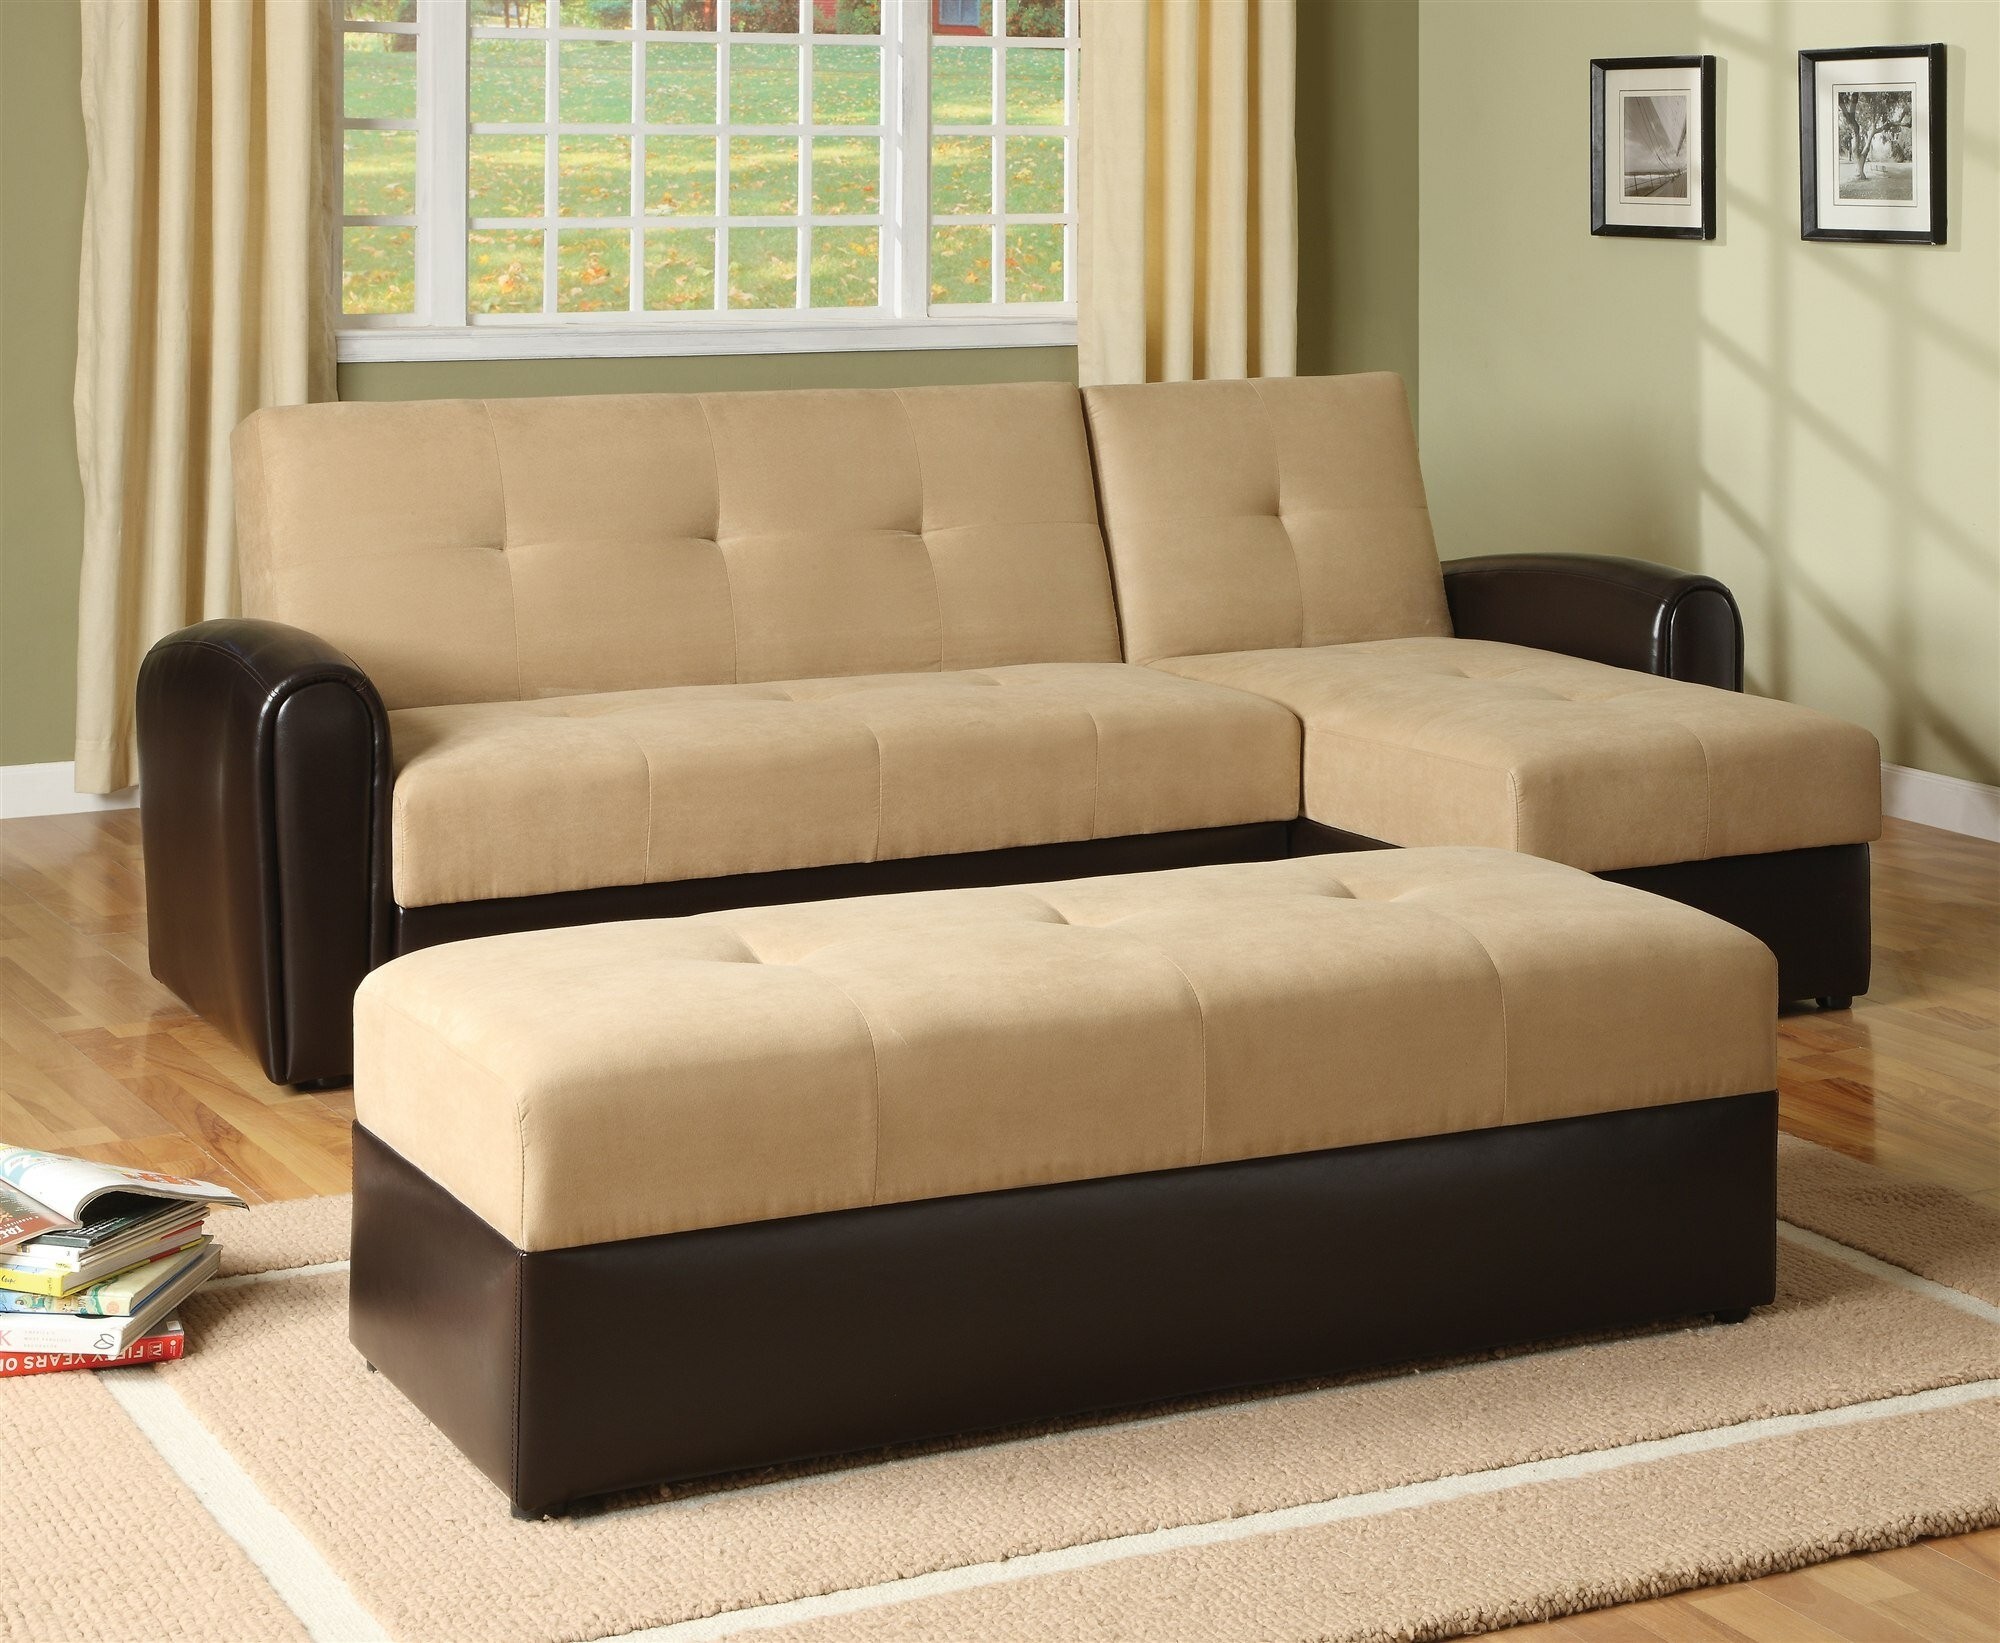 newman sectional sofa bed